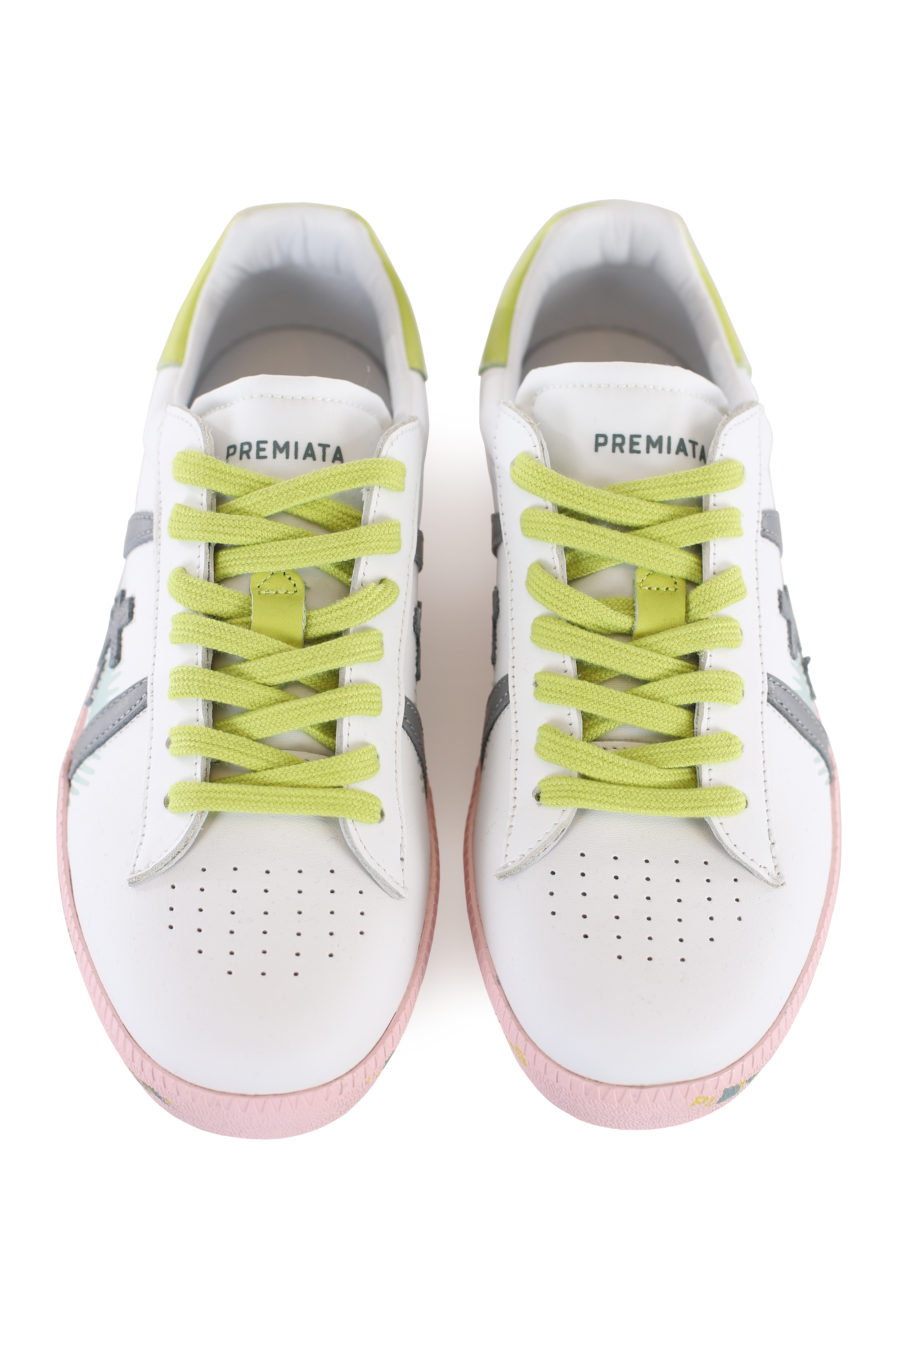 White trainers with green details and pink sole "Andyd" - IMG 1657